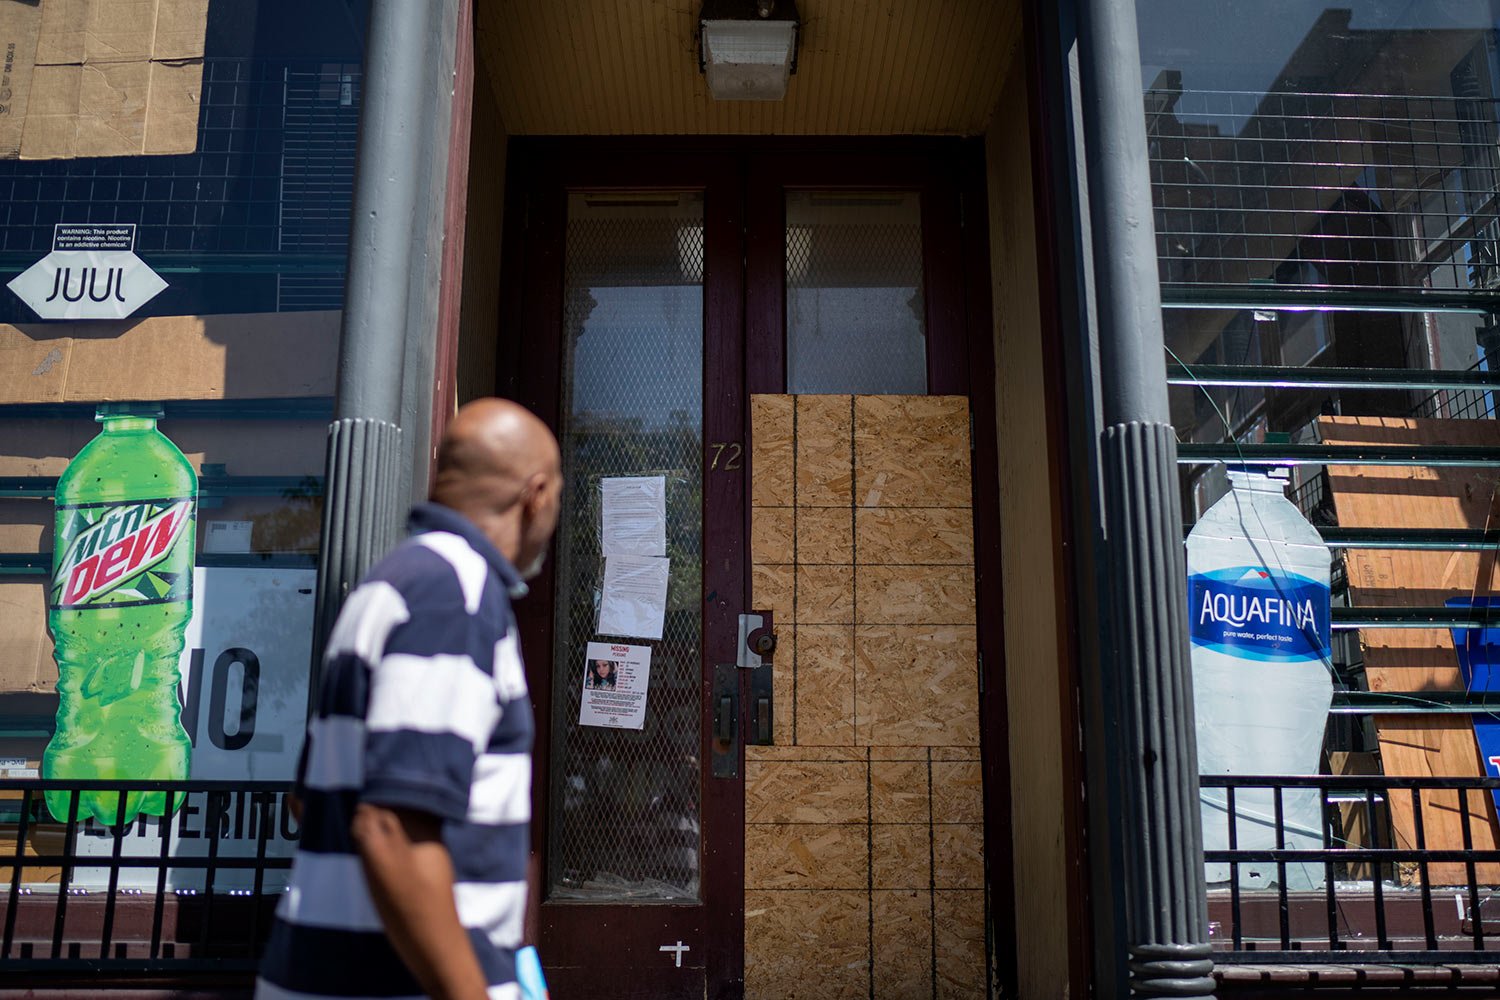  A convenience store is boarded up after the city shut it down in the wake of recent shootings outside the shop in Rochester, N.Y., Tuesday, Aug. 22, 2023. (AP Photo/David Goldman)  